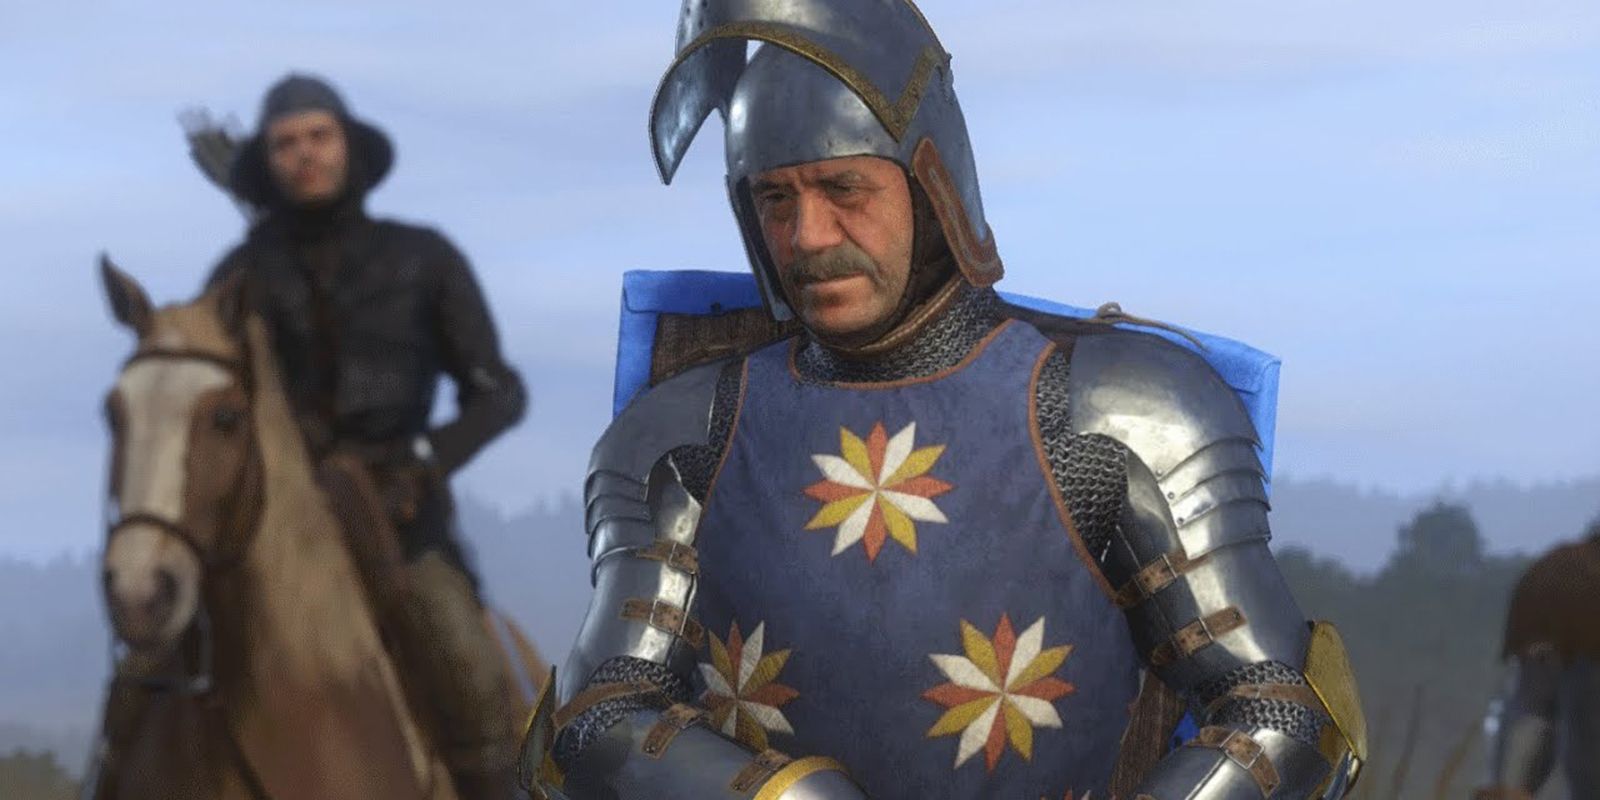 Kingdom Come: Deliverance – Every Armor Set, Ranked | Game-Thought.com